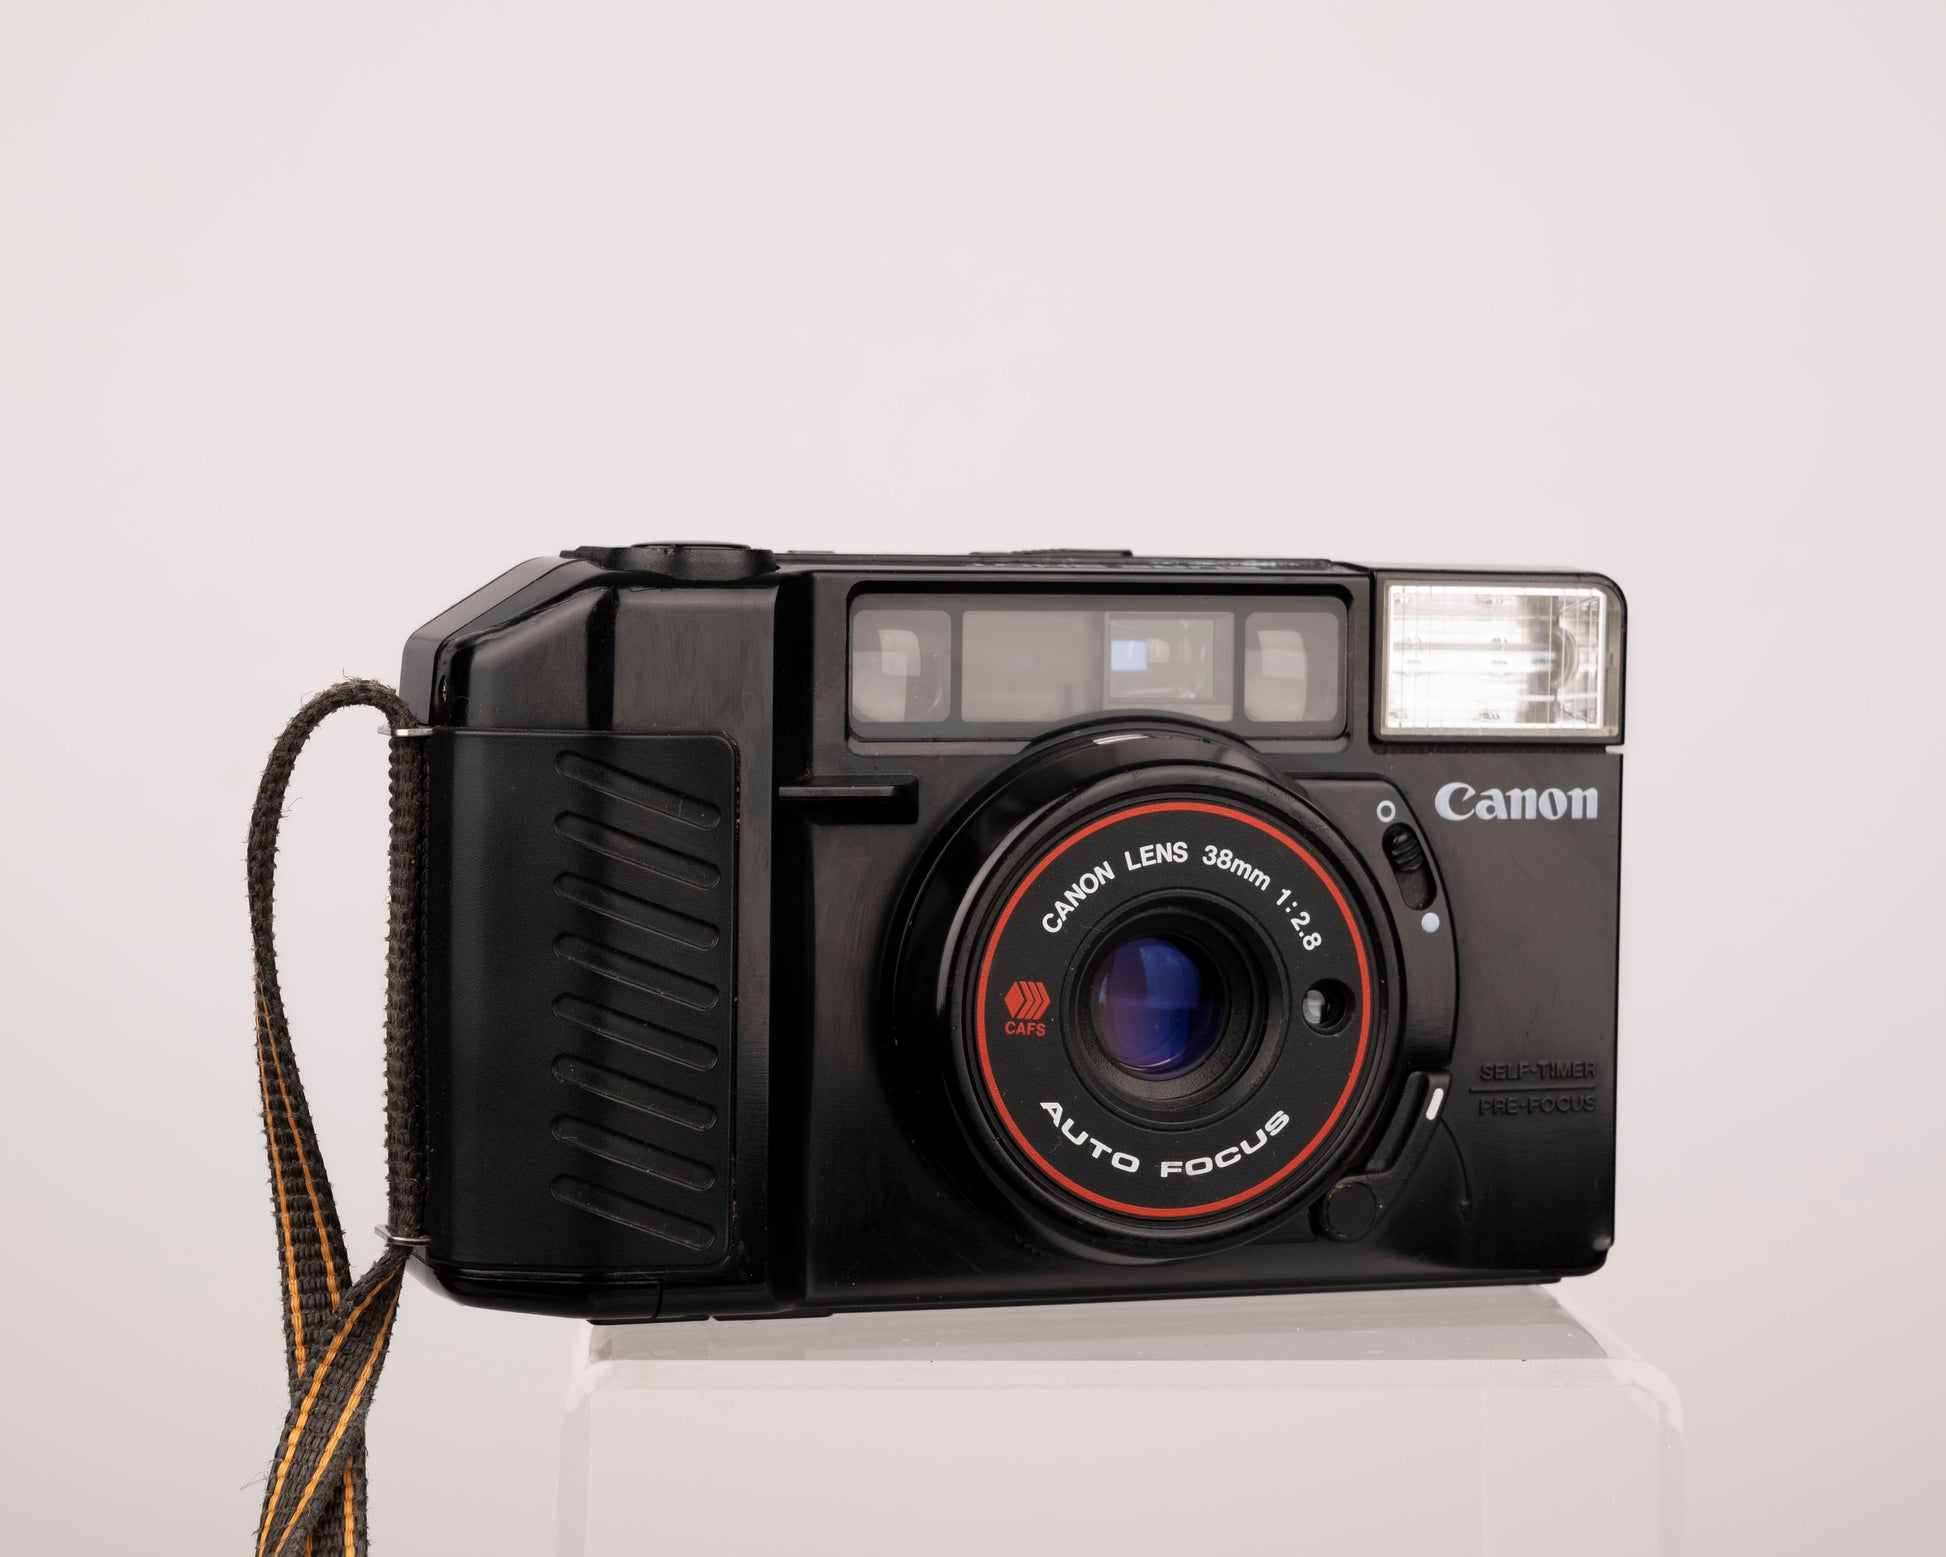 The Canon (new) Sure Shot from circa 1983 is a classic 35mm point-and-shoot with a sharp 4-element 38mm f2.8 lens